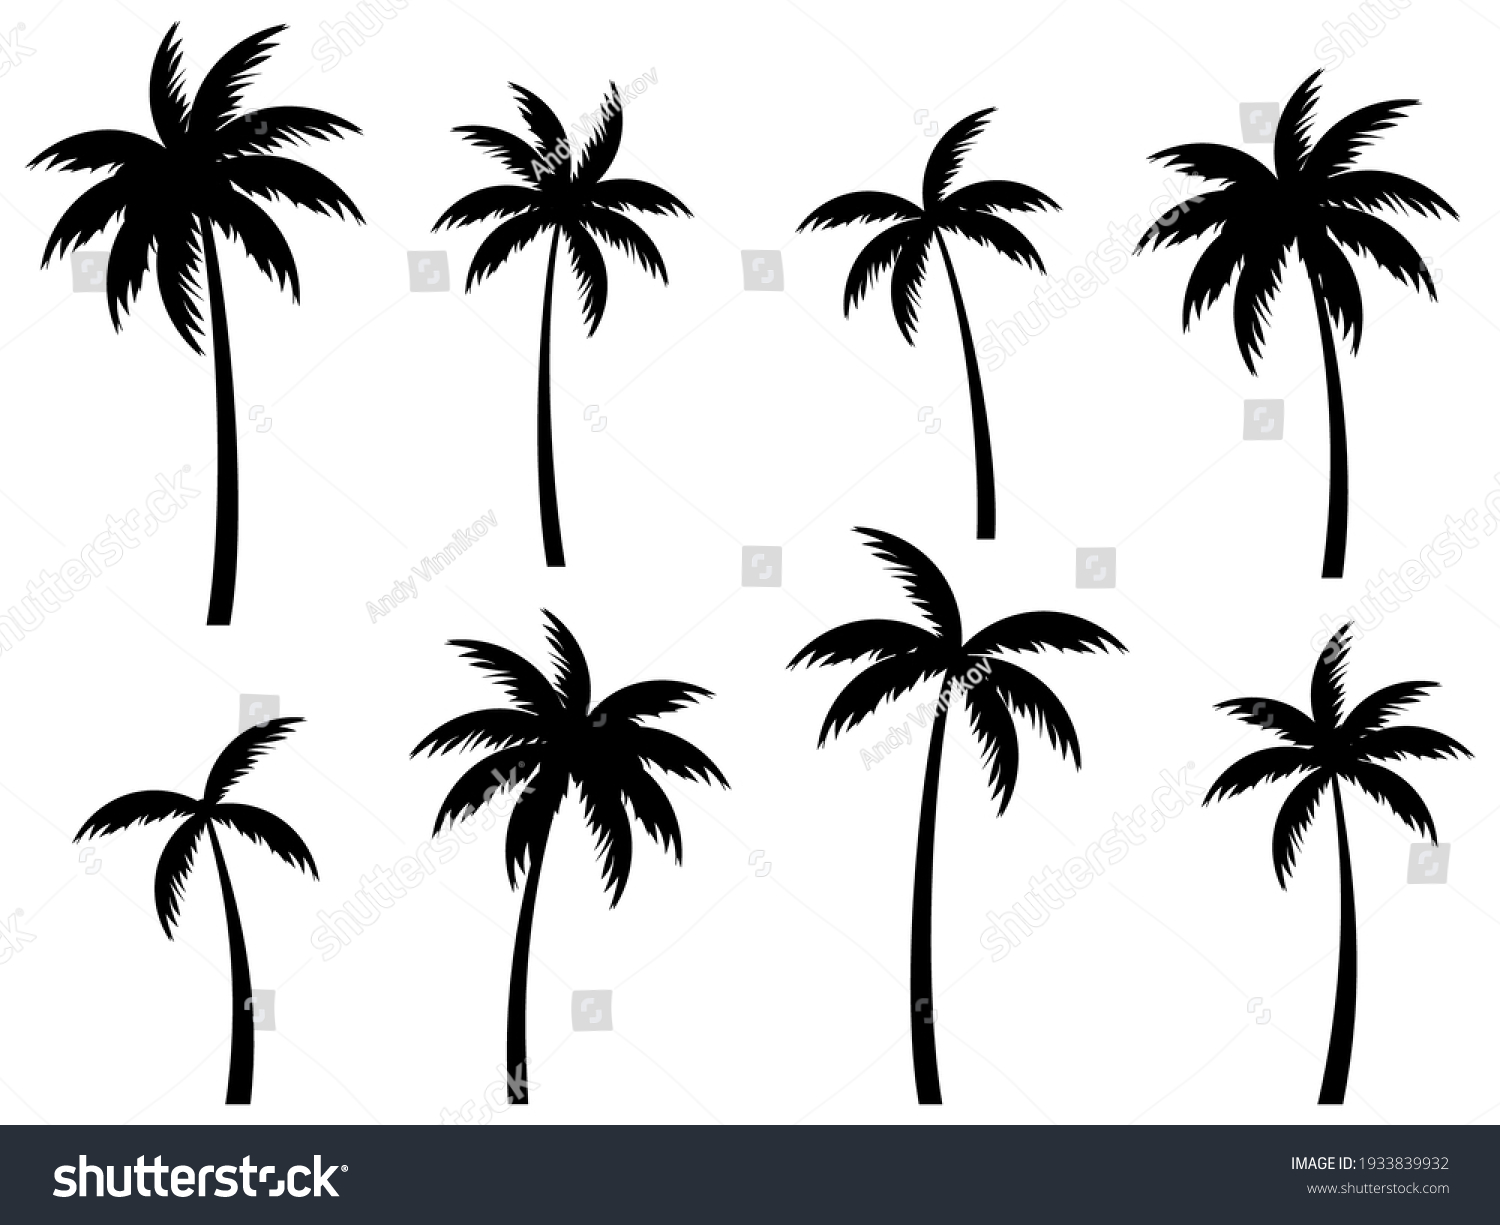 SVG of Black palm trees set isolated on white background. Palm silhouettes. Design of palm trees for posters, banners and promotional items. Vector illustration svg